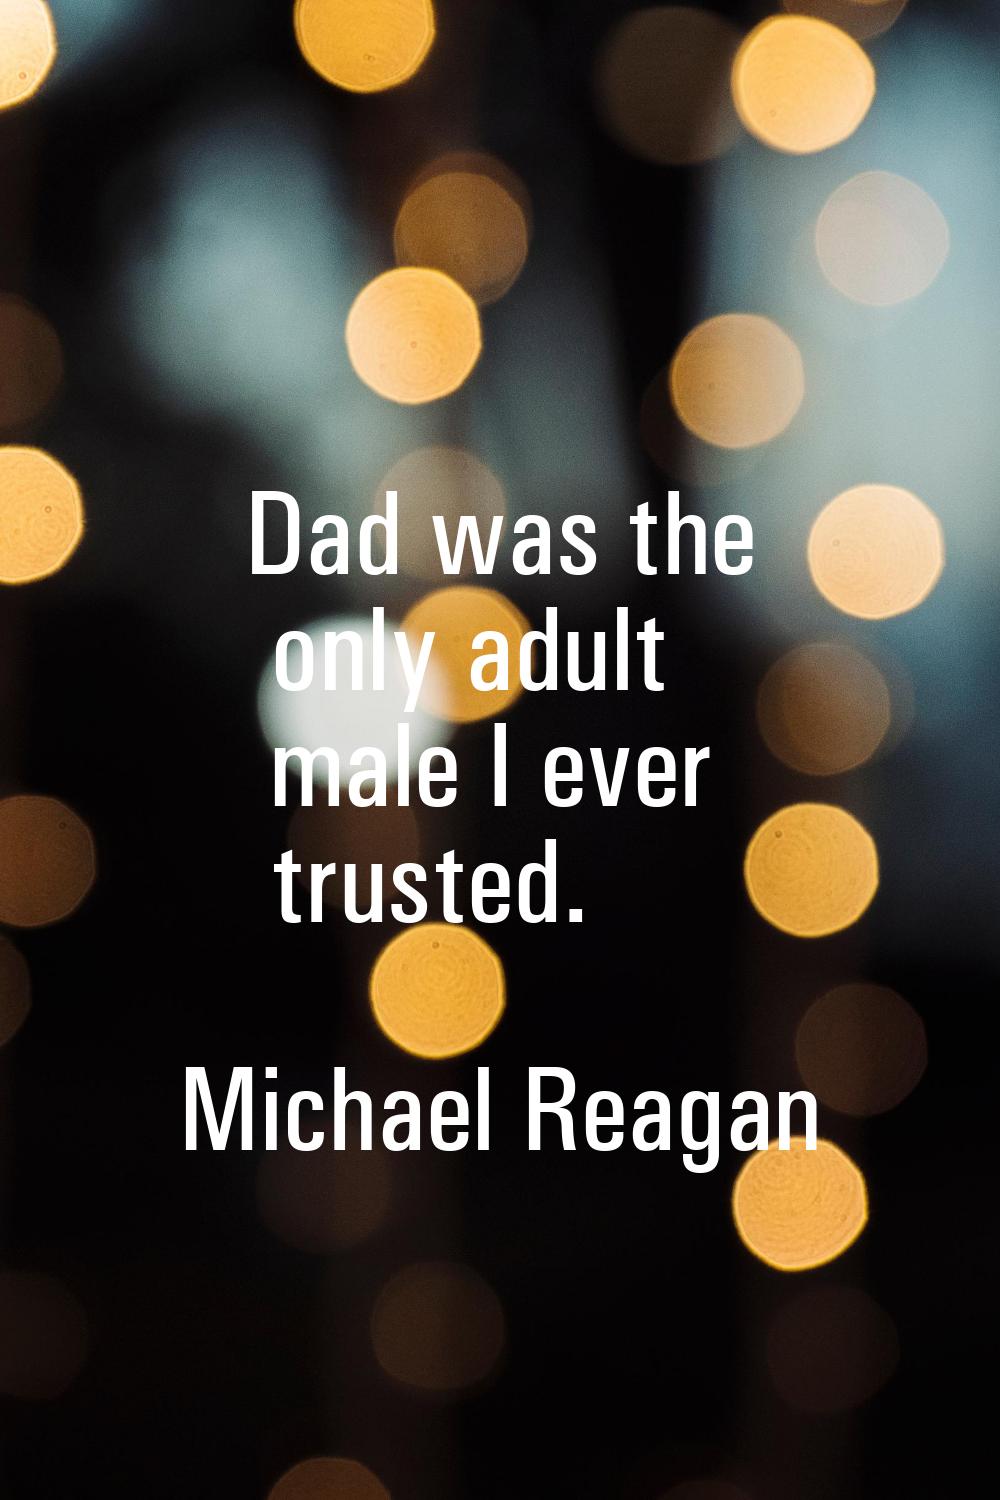 Dad was the only adult male I ever trusted.